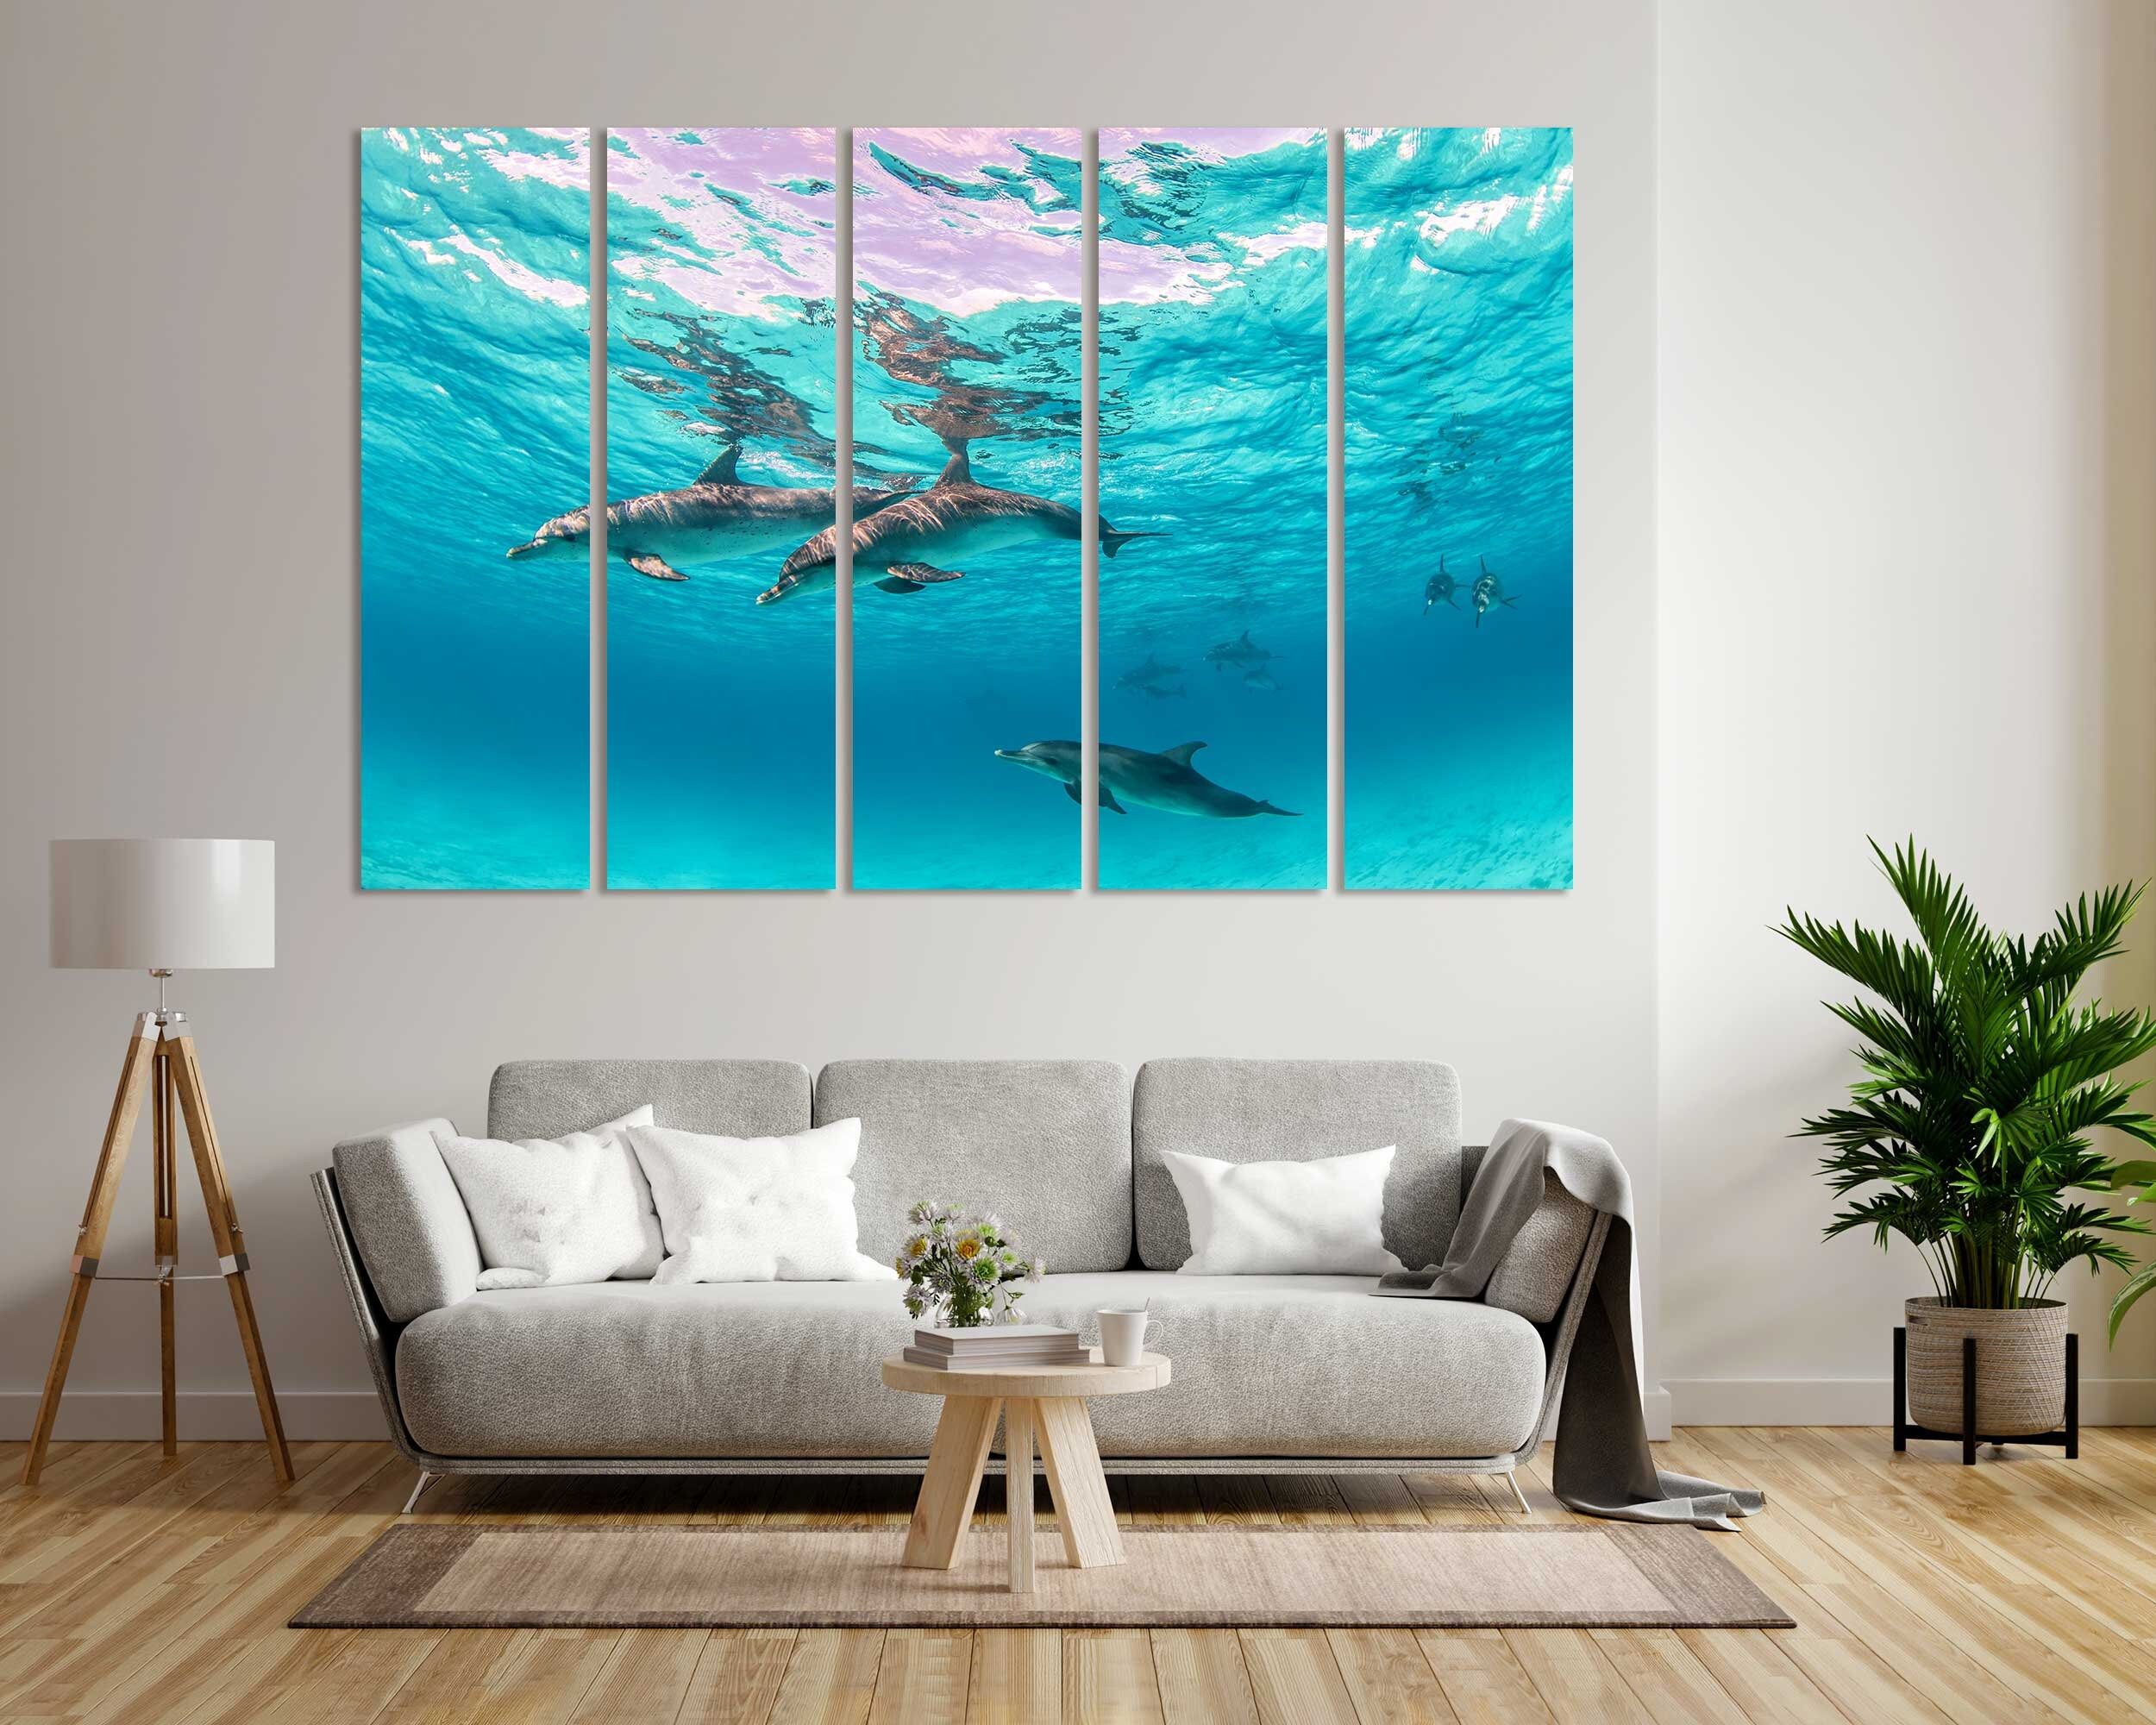 Cute Dolphins Underwater Original Art For Interior Decor Sea – Etsy Inside Most Recent Underwater Wood Wall Art (View 14 of 20)